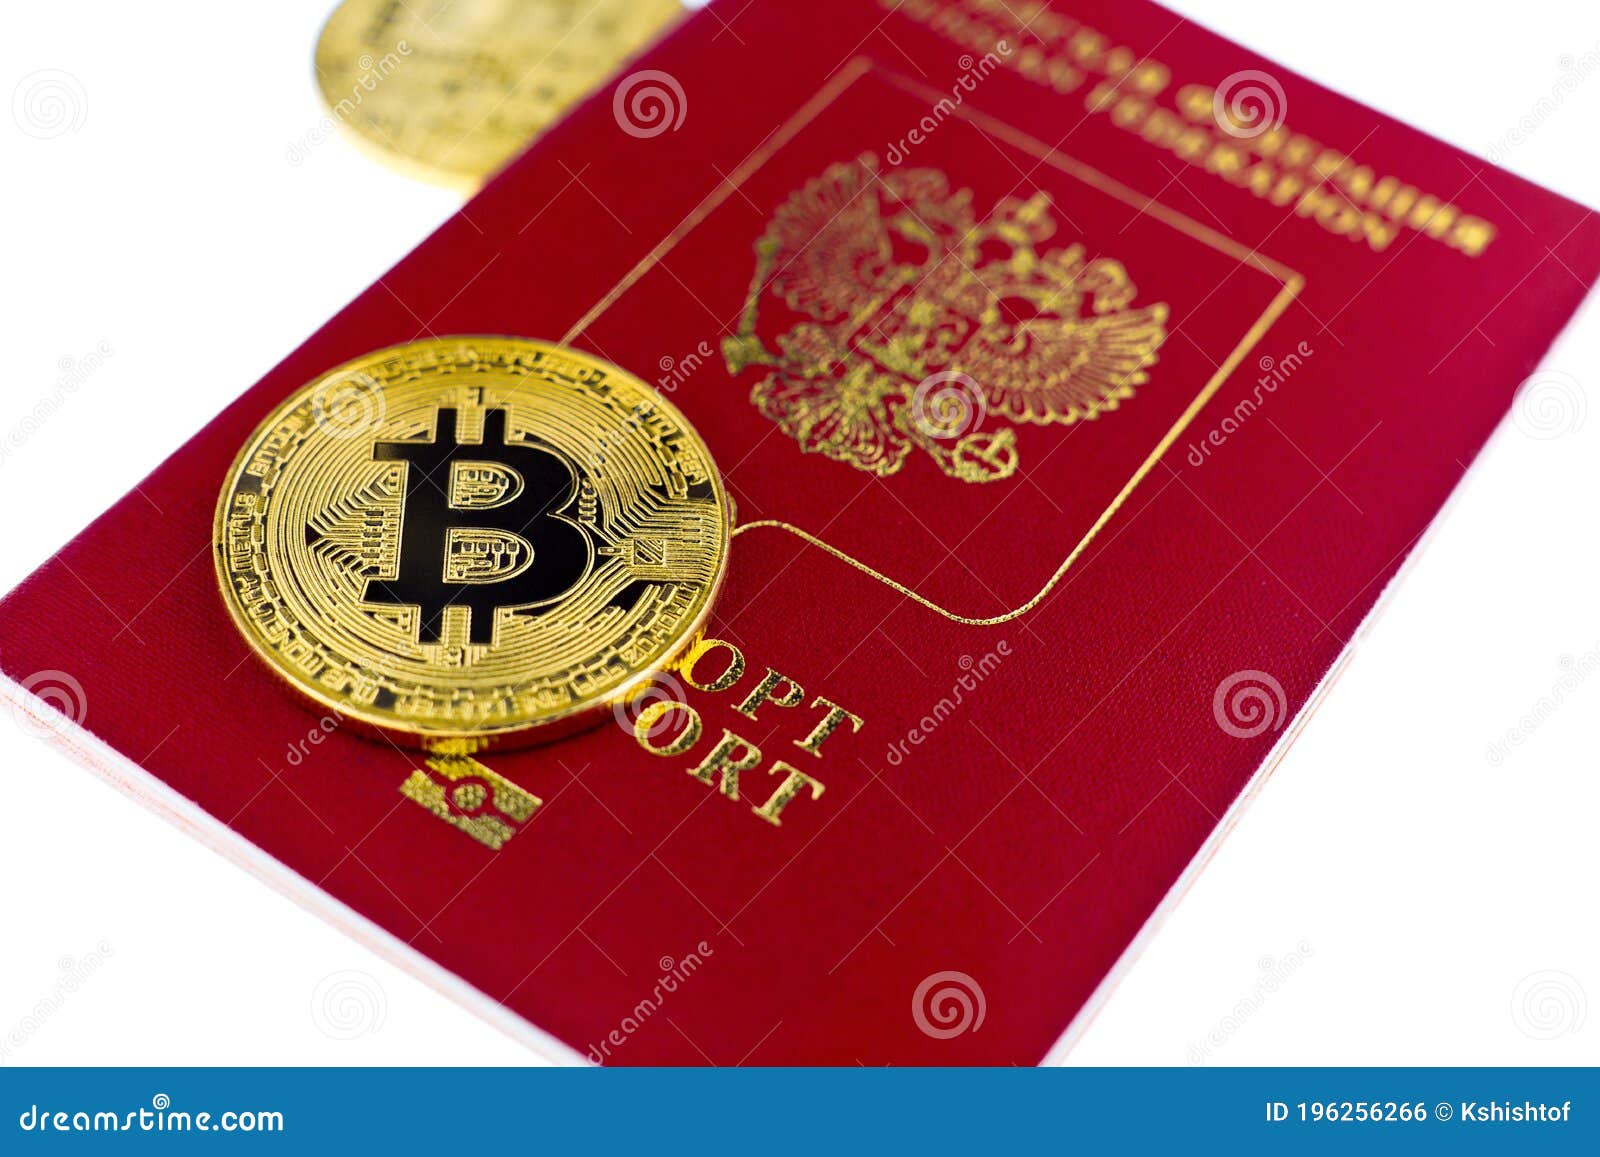 Golden Bitcoin Coin And Passport Of Russian Federation Stock Photo